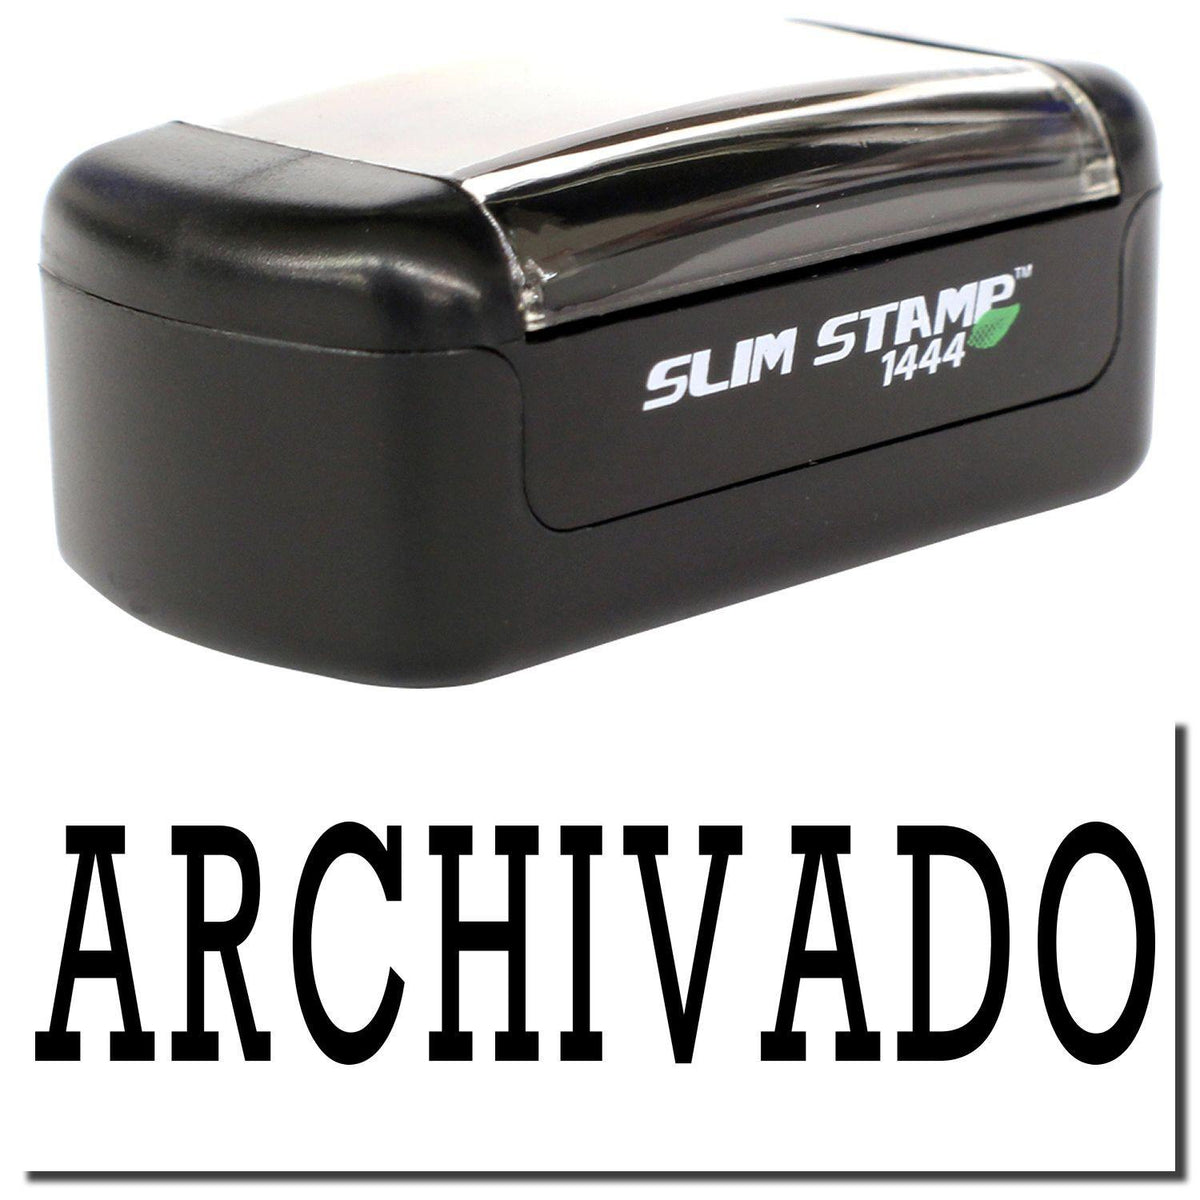 A stock office pre-inked stamp with a stamped image showing how the text &quot;ARCHIVADO&quot; is displayed after stamping.